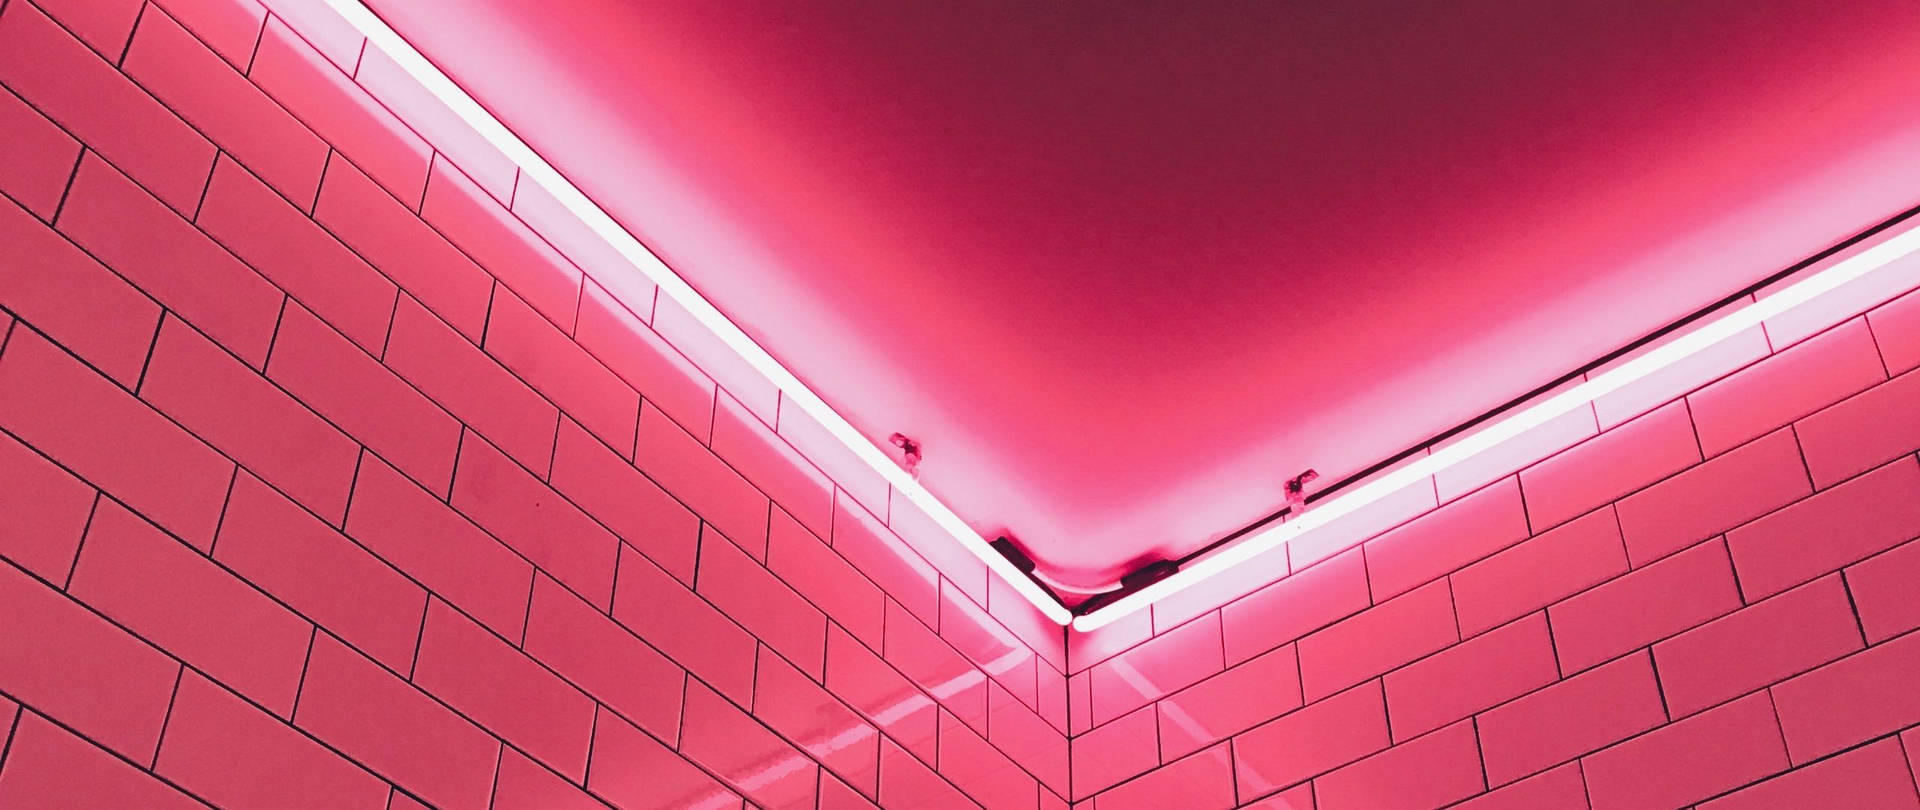 Cool Aesthetic Pink Tile Background